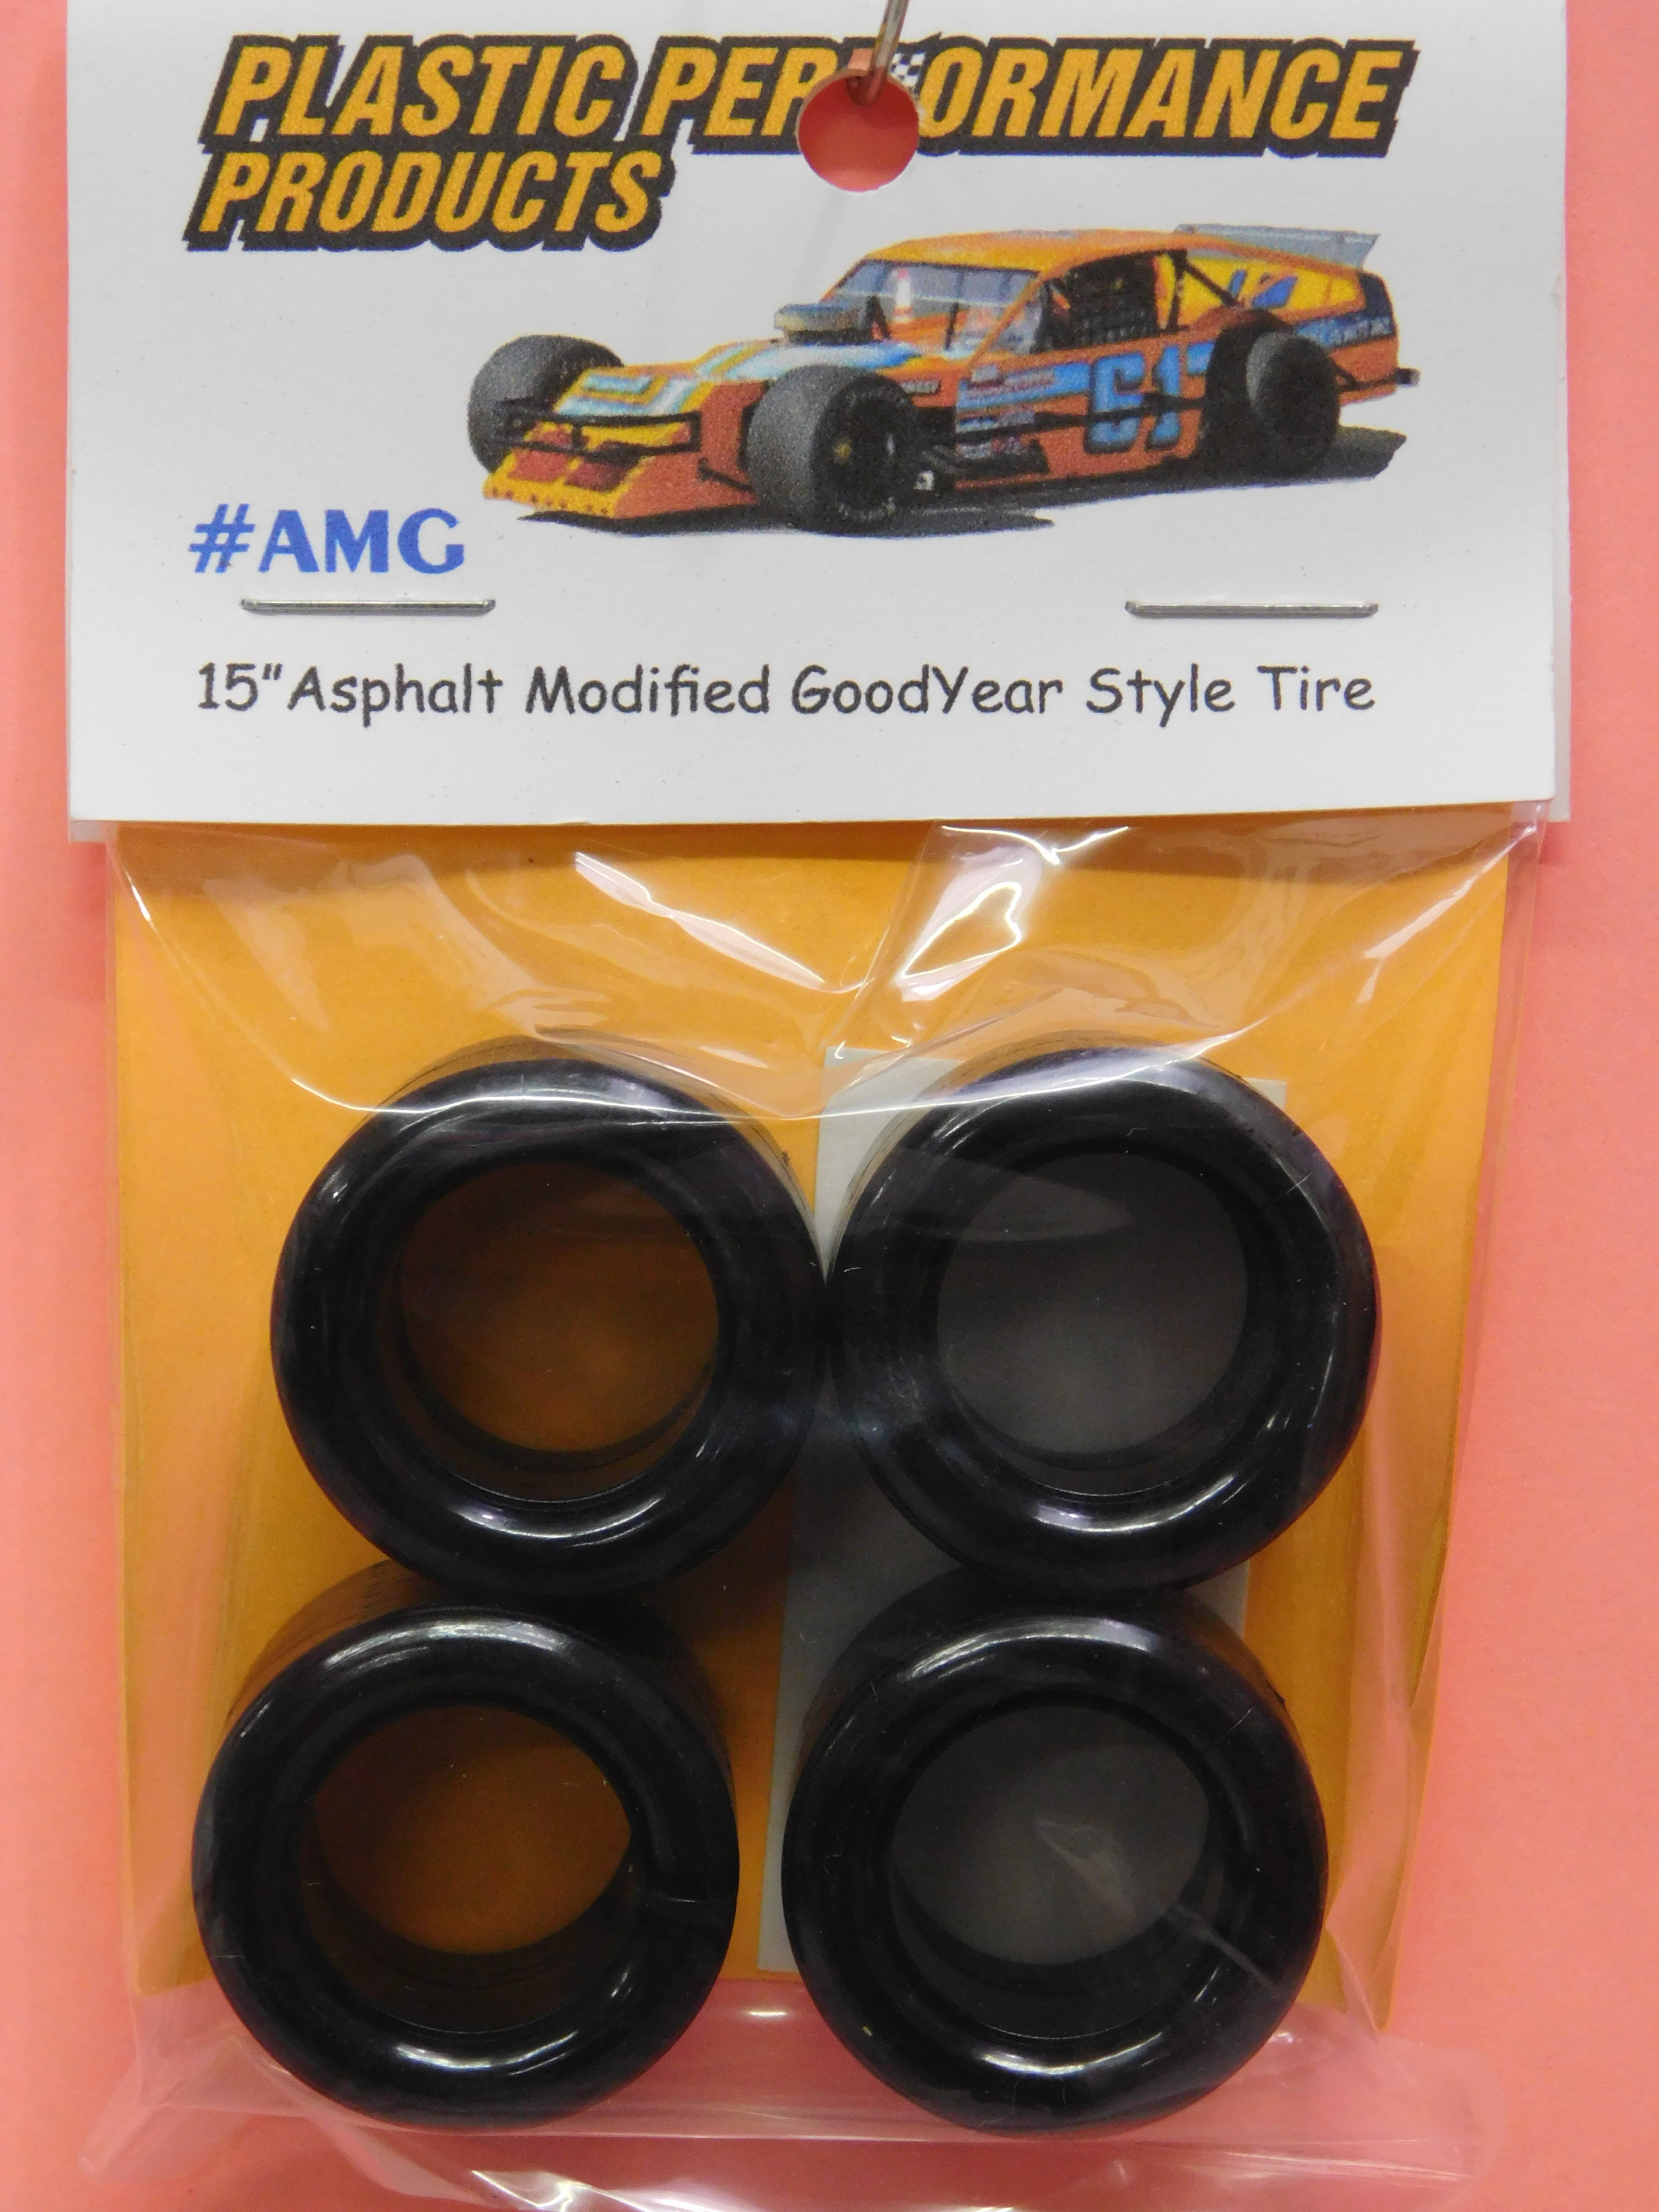 ST 2090-F 1/64 HO Scale Slot Car Tire for Life-Like Trucks and all "M" Chassis, 